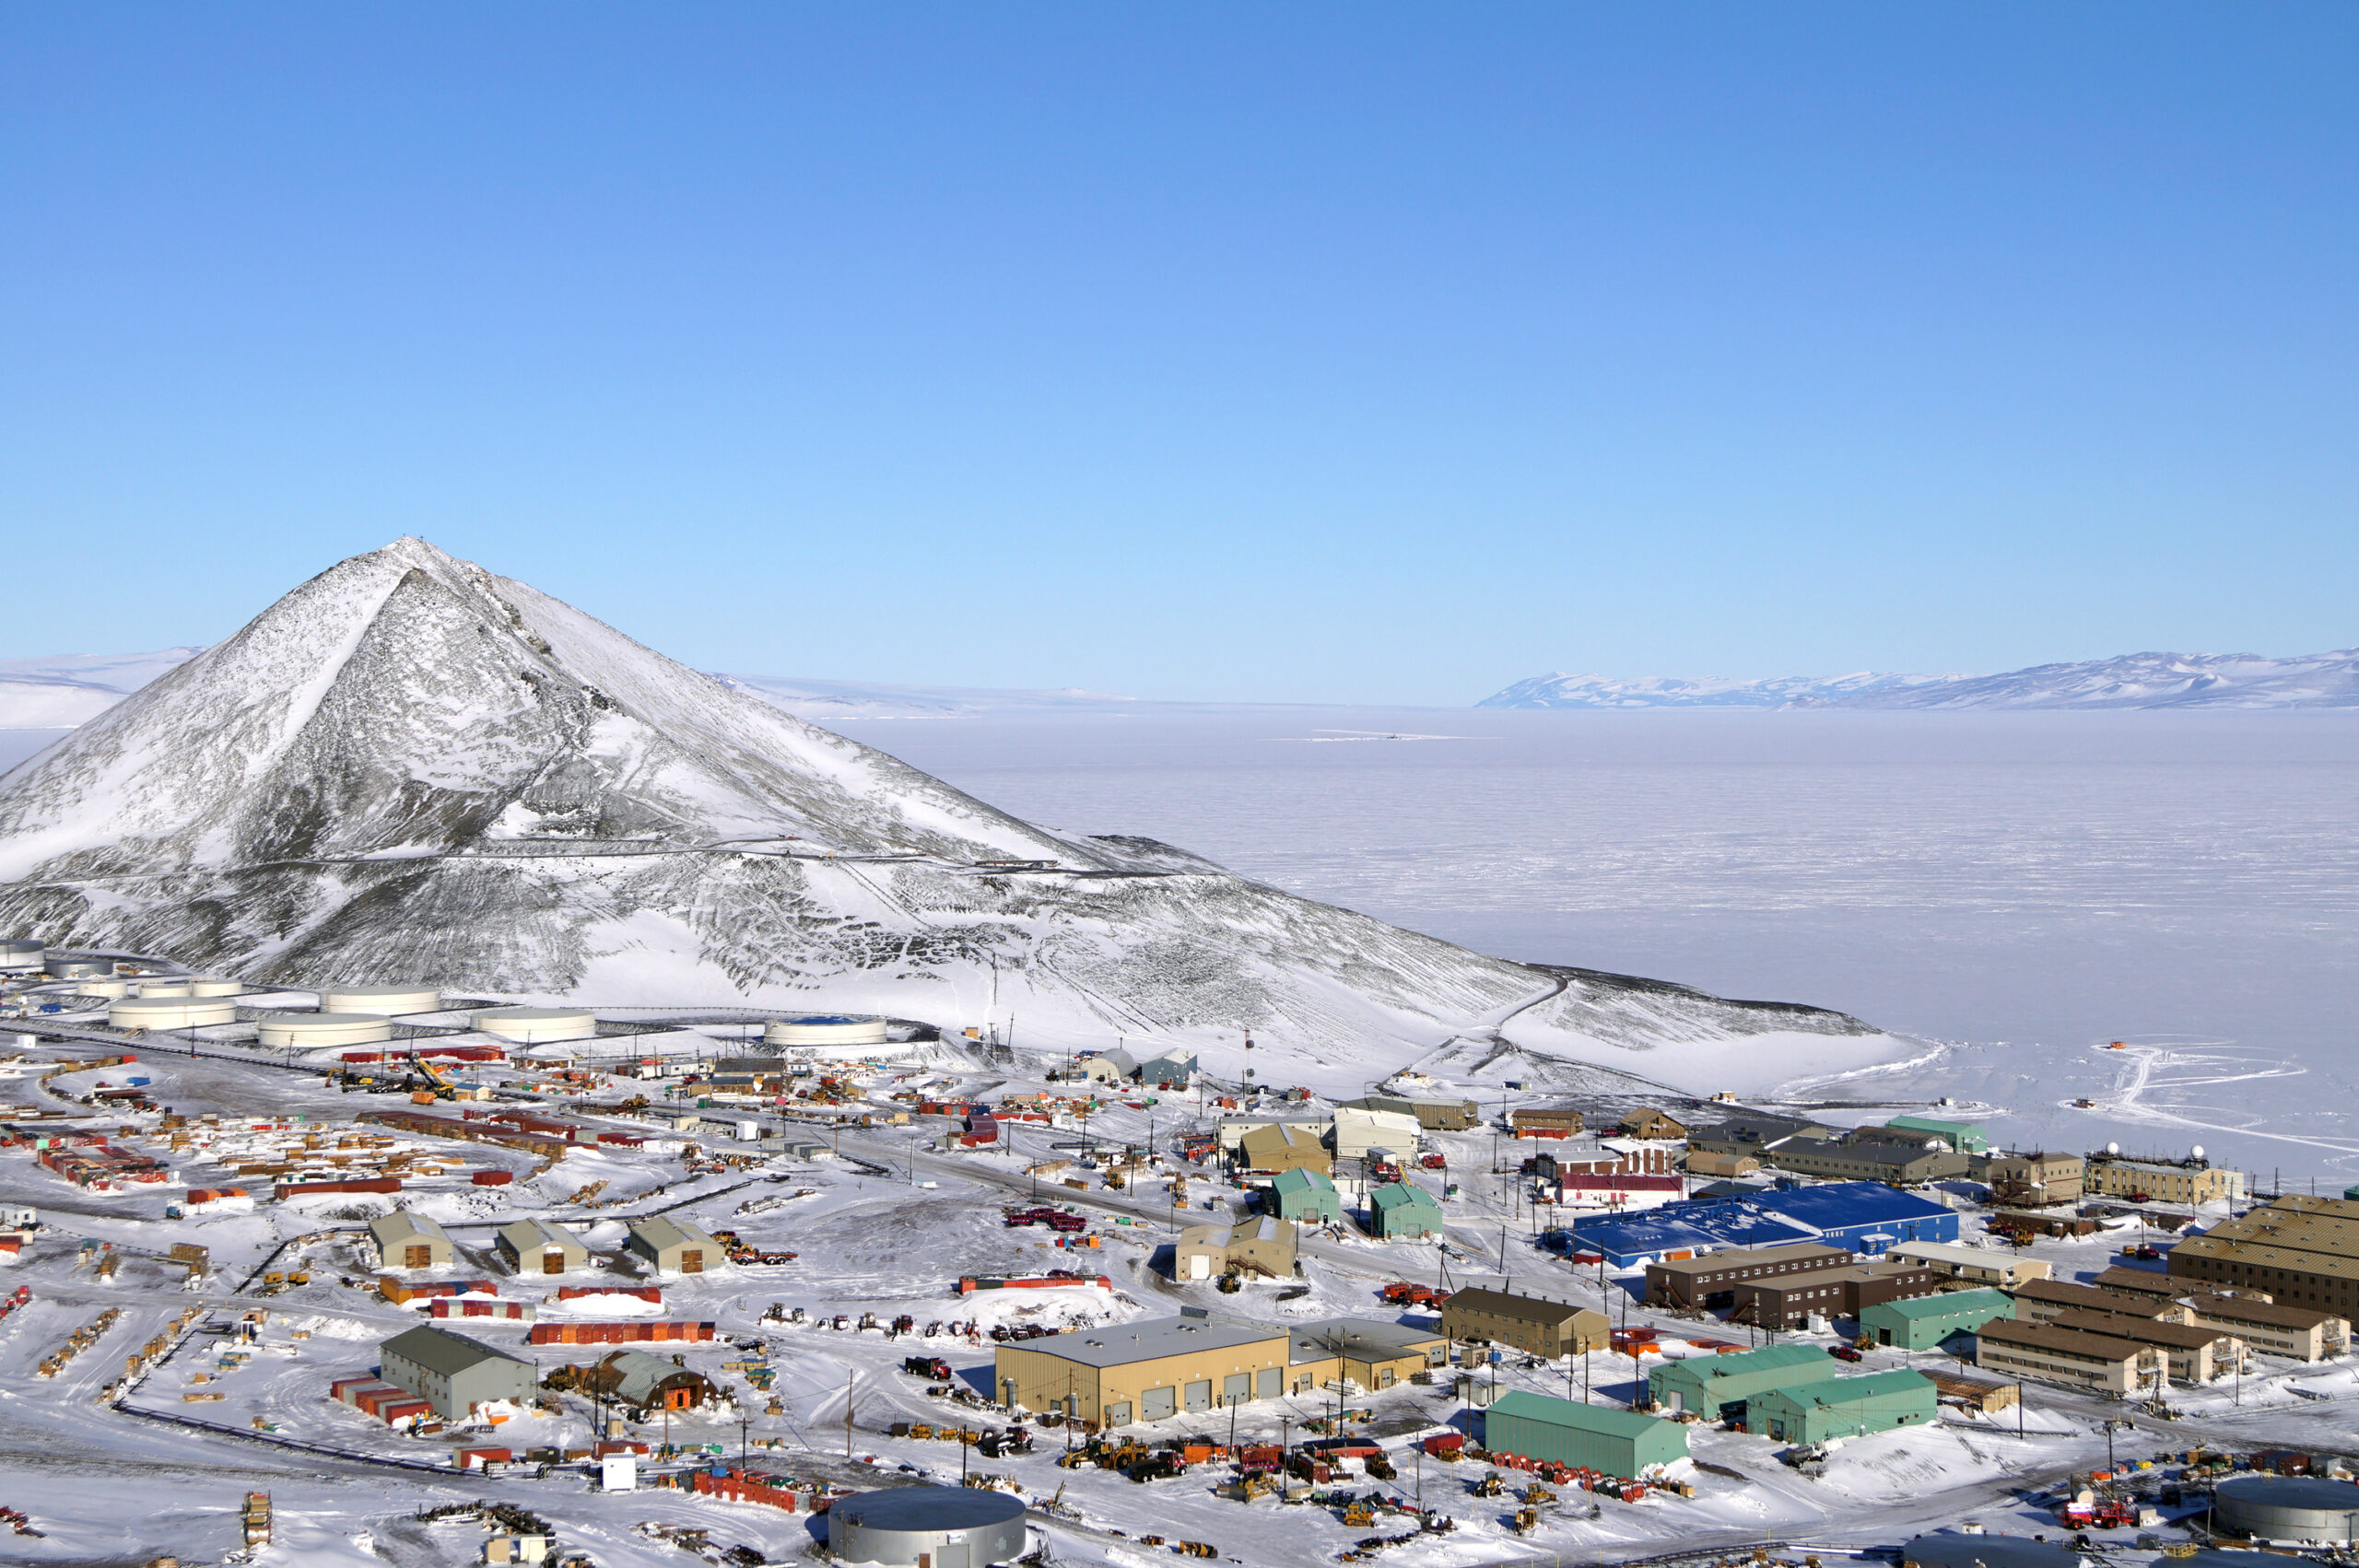 ICE FM: The World's Most Remote — and Coldest — Radio Station